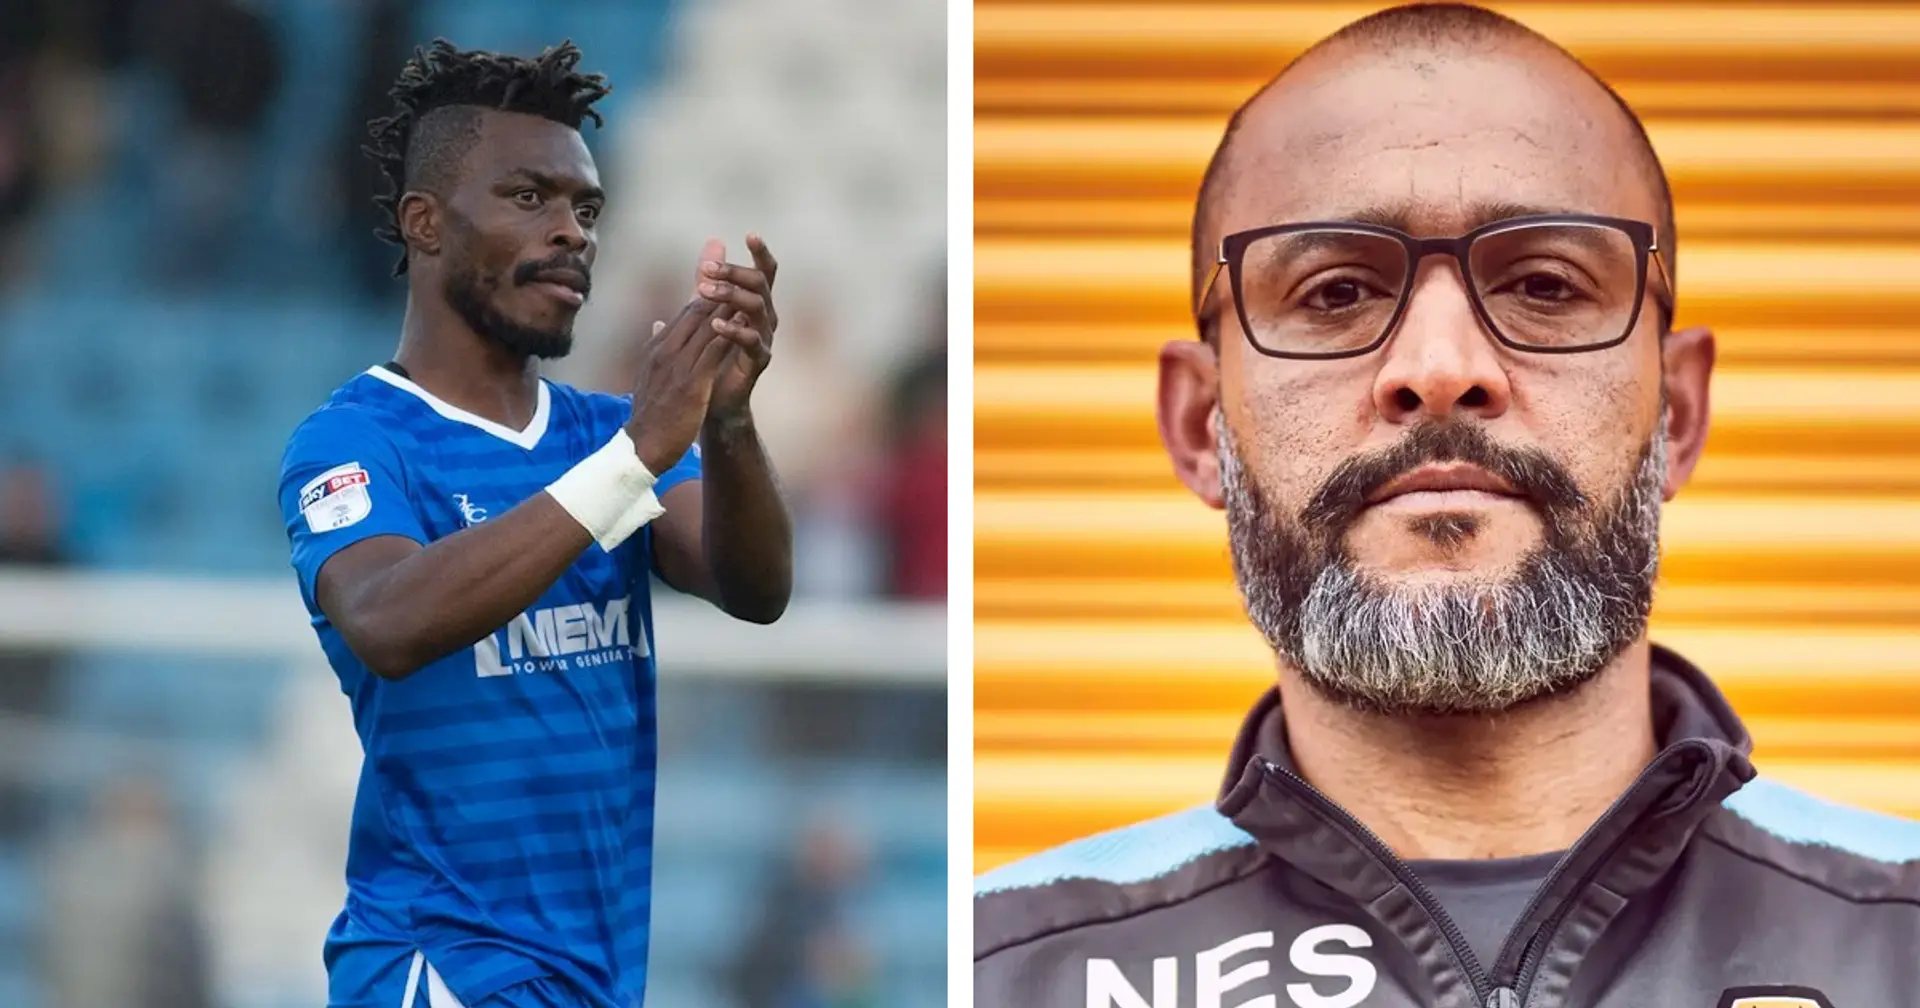 'Hopefully in the next 10 years, we see a drastic change': former DR Congo captain launches scheme for black coaches